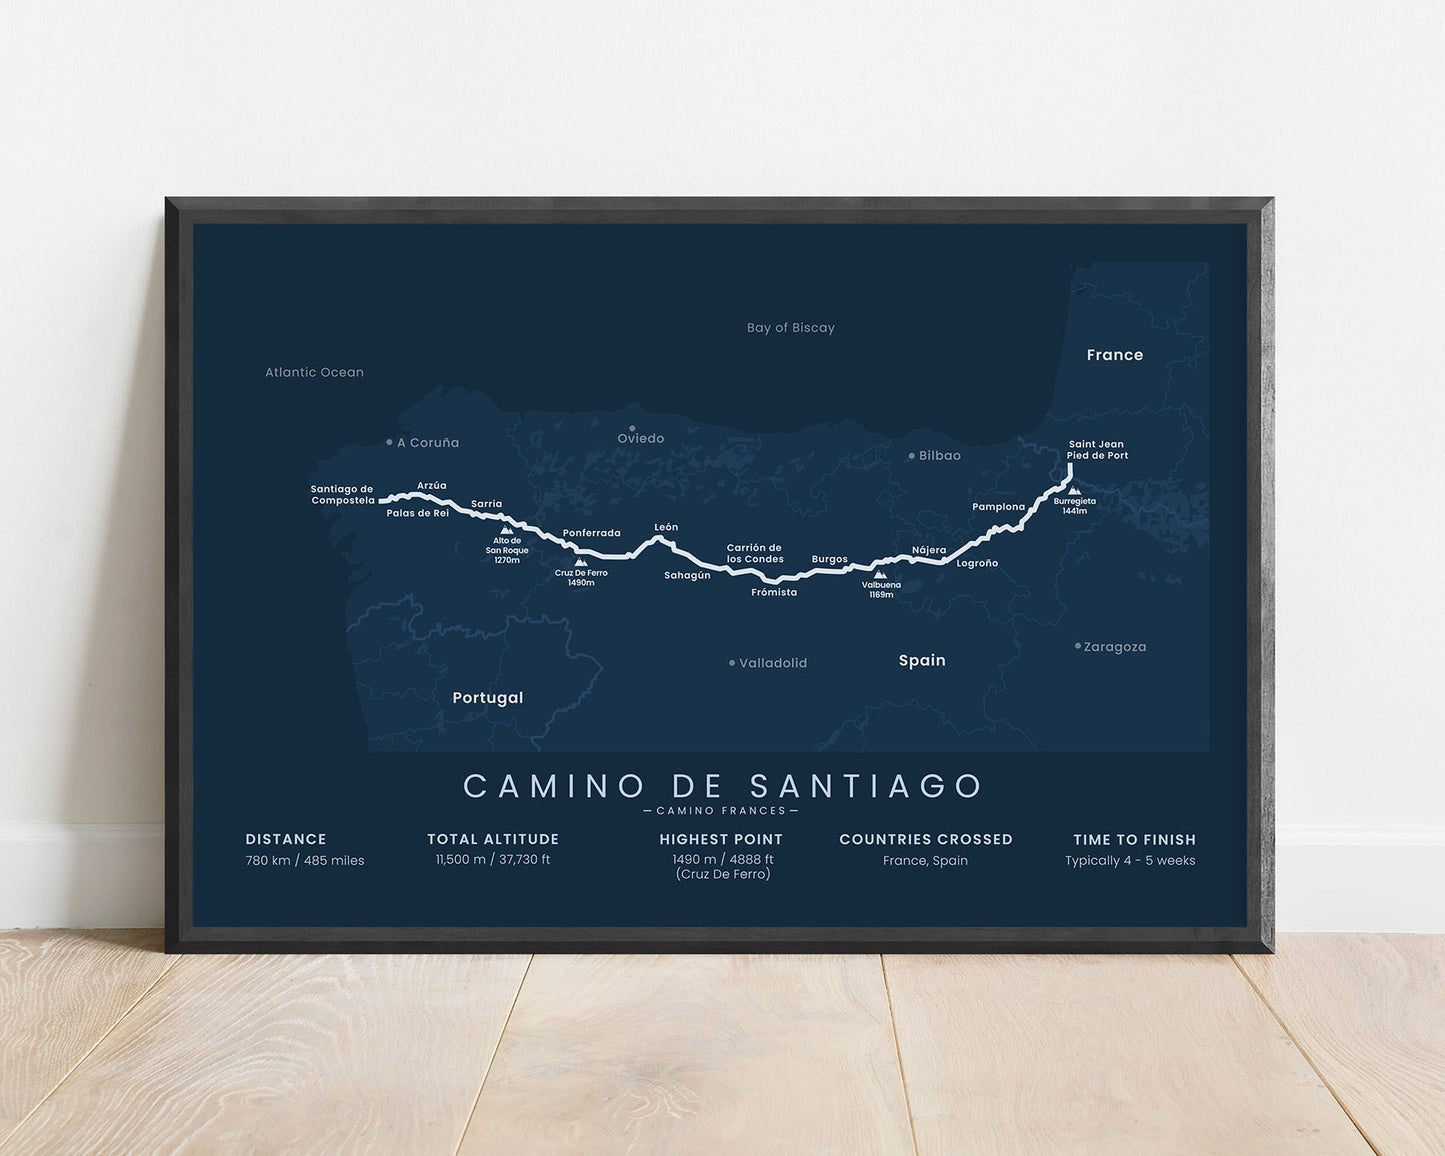 Camino Frances (St. James Way) from Saint-Jean-Pied-de-Port to Santiago de Compostela hiking trail wall art with blue background